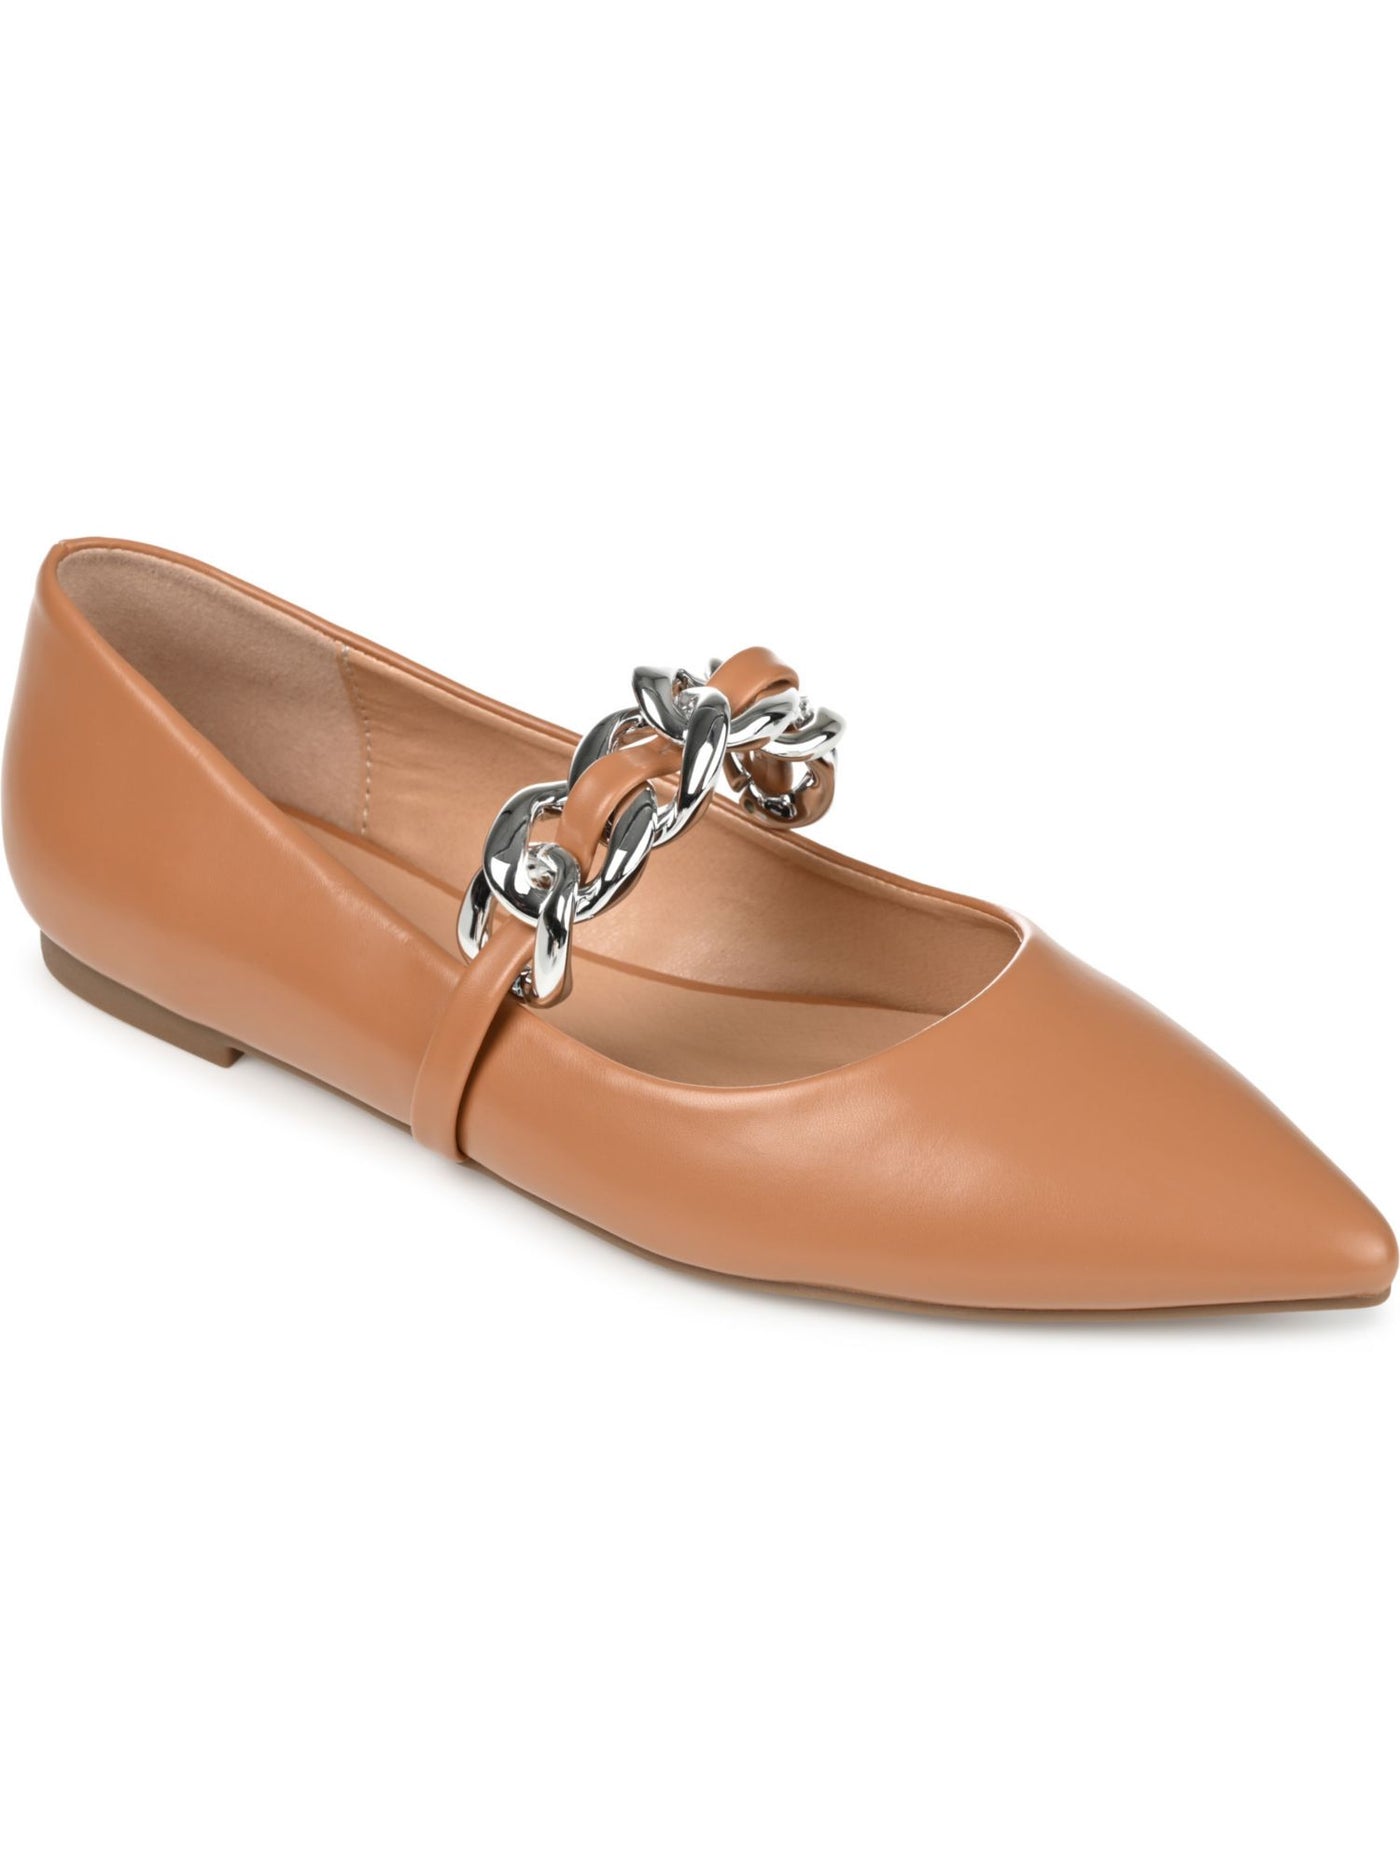 JOURNEE COLLECTION Womens Brown Chain Accent Mary Jane Padded Metinaa Pointed Toe Slip On Ballet Flats 6.5